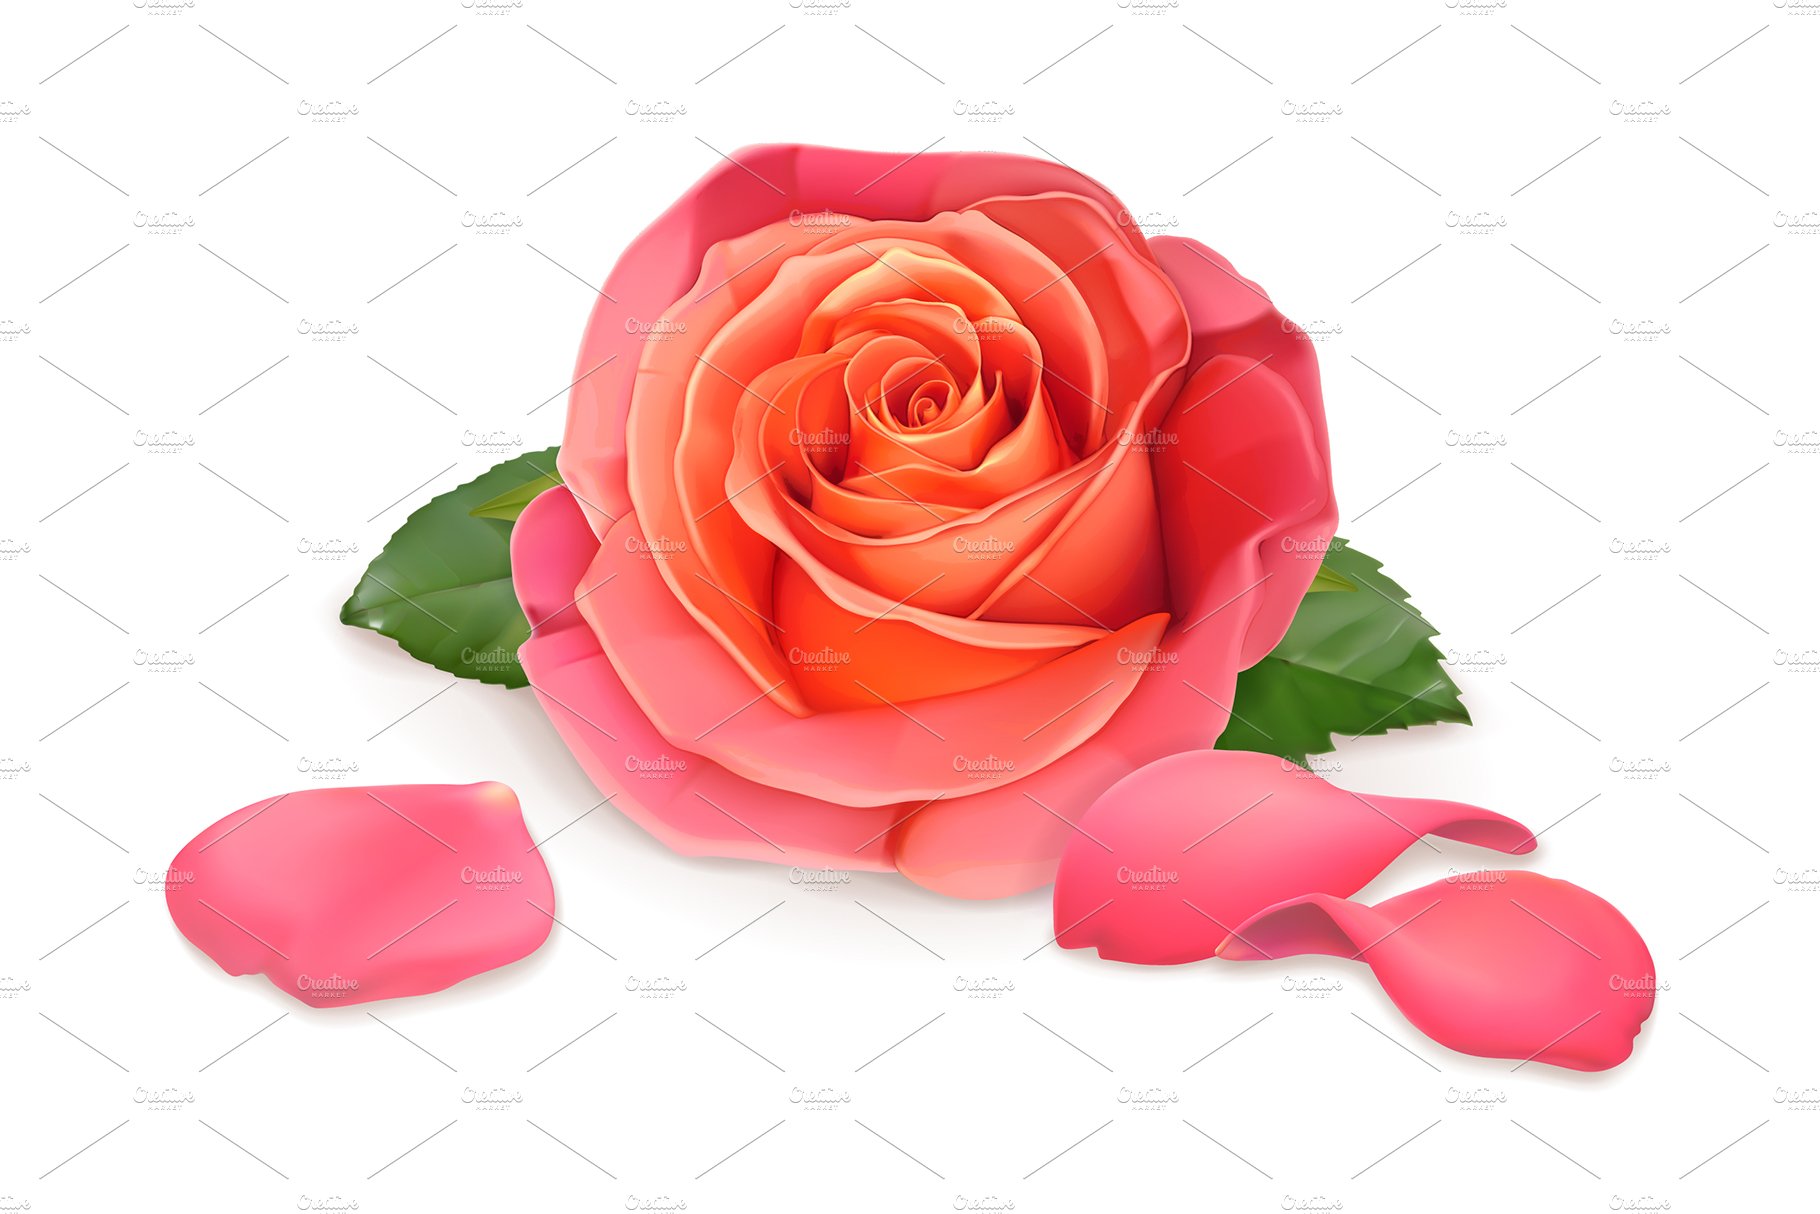 Pink rose with green leaves on a white background.